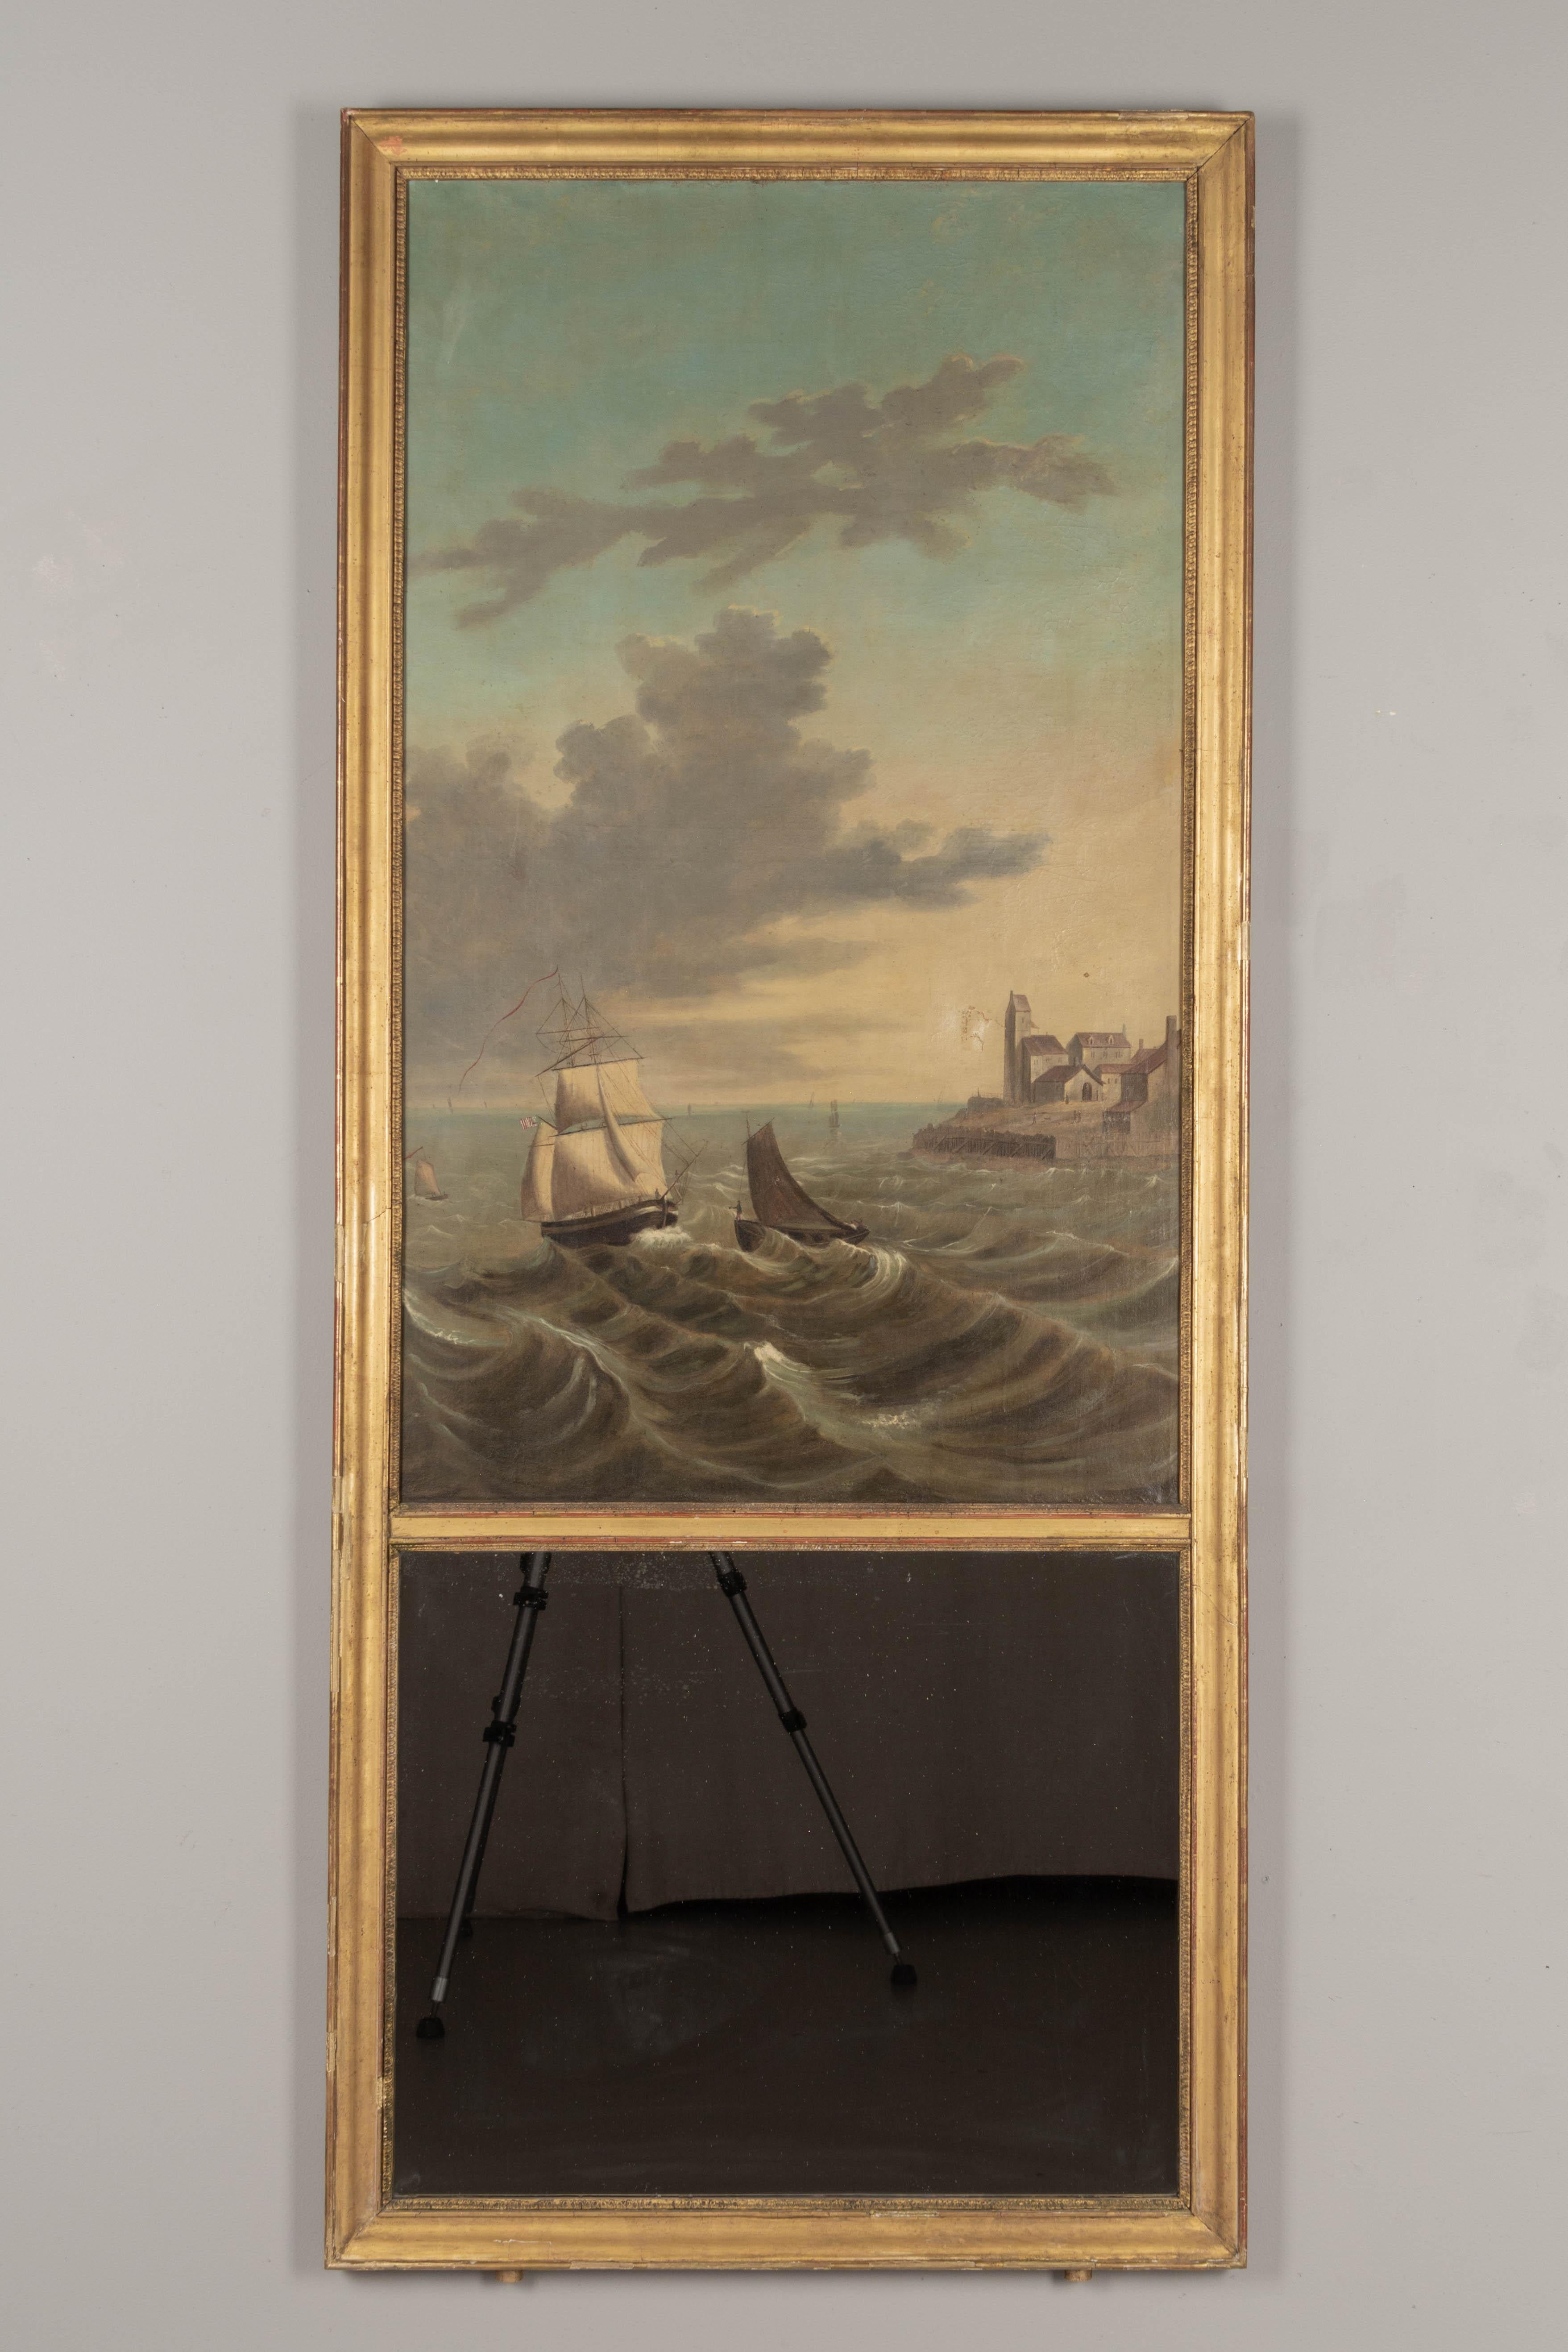 An early 19th century French Louis XV style trumeau mirror with a large oil painting depicting a seascape with ships on a stormy coast. Canvas has an old repaired tear and was relined at some point. Giltwood frame has several pieces of missing trim.